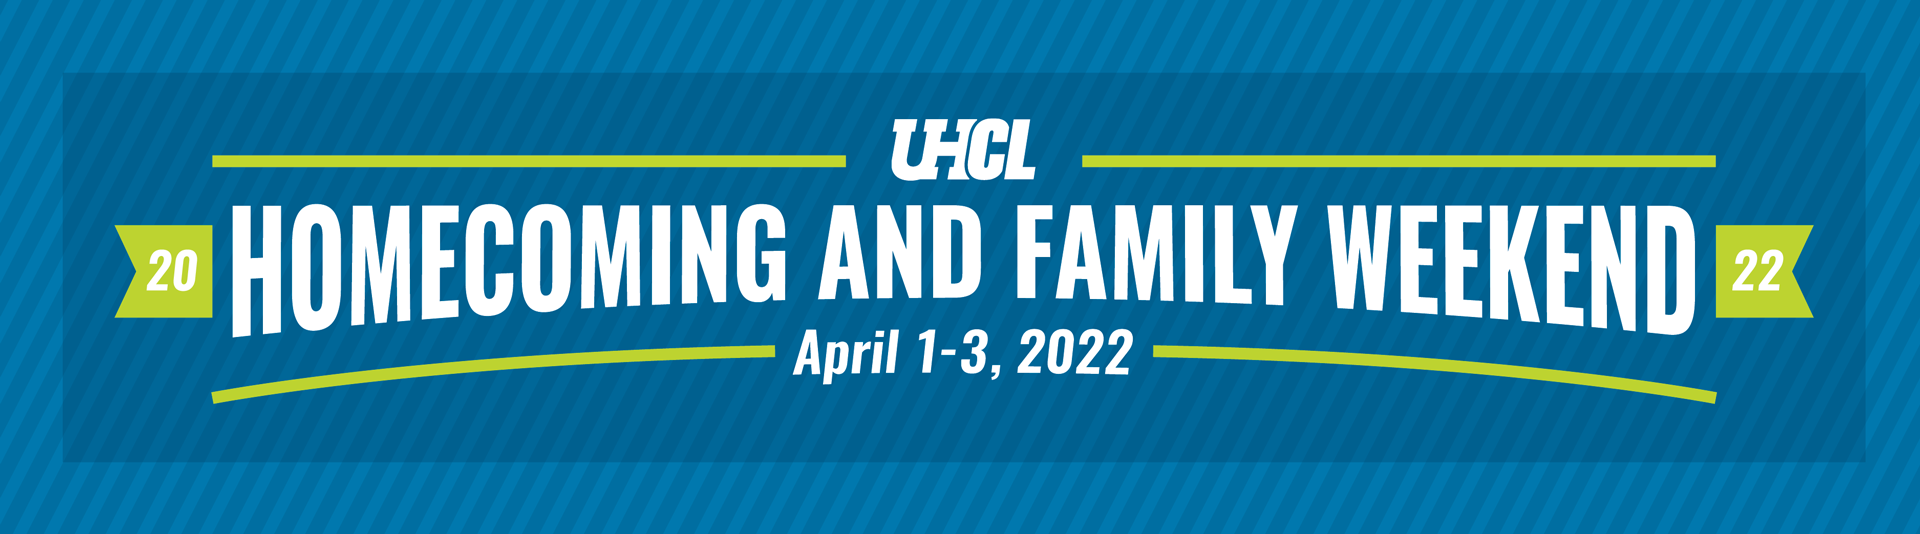 2022 UHCL Homecoming and Family Weekend April 1-3, 2022